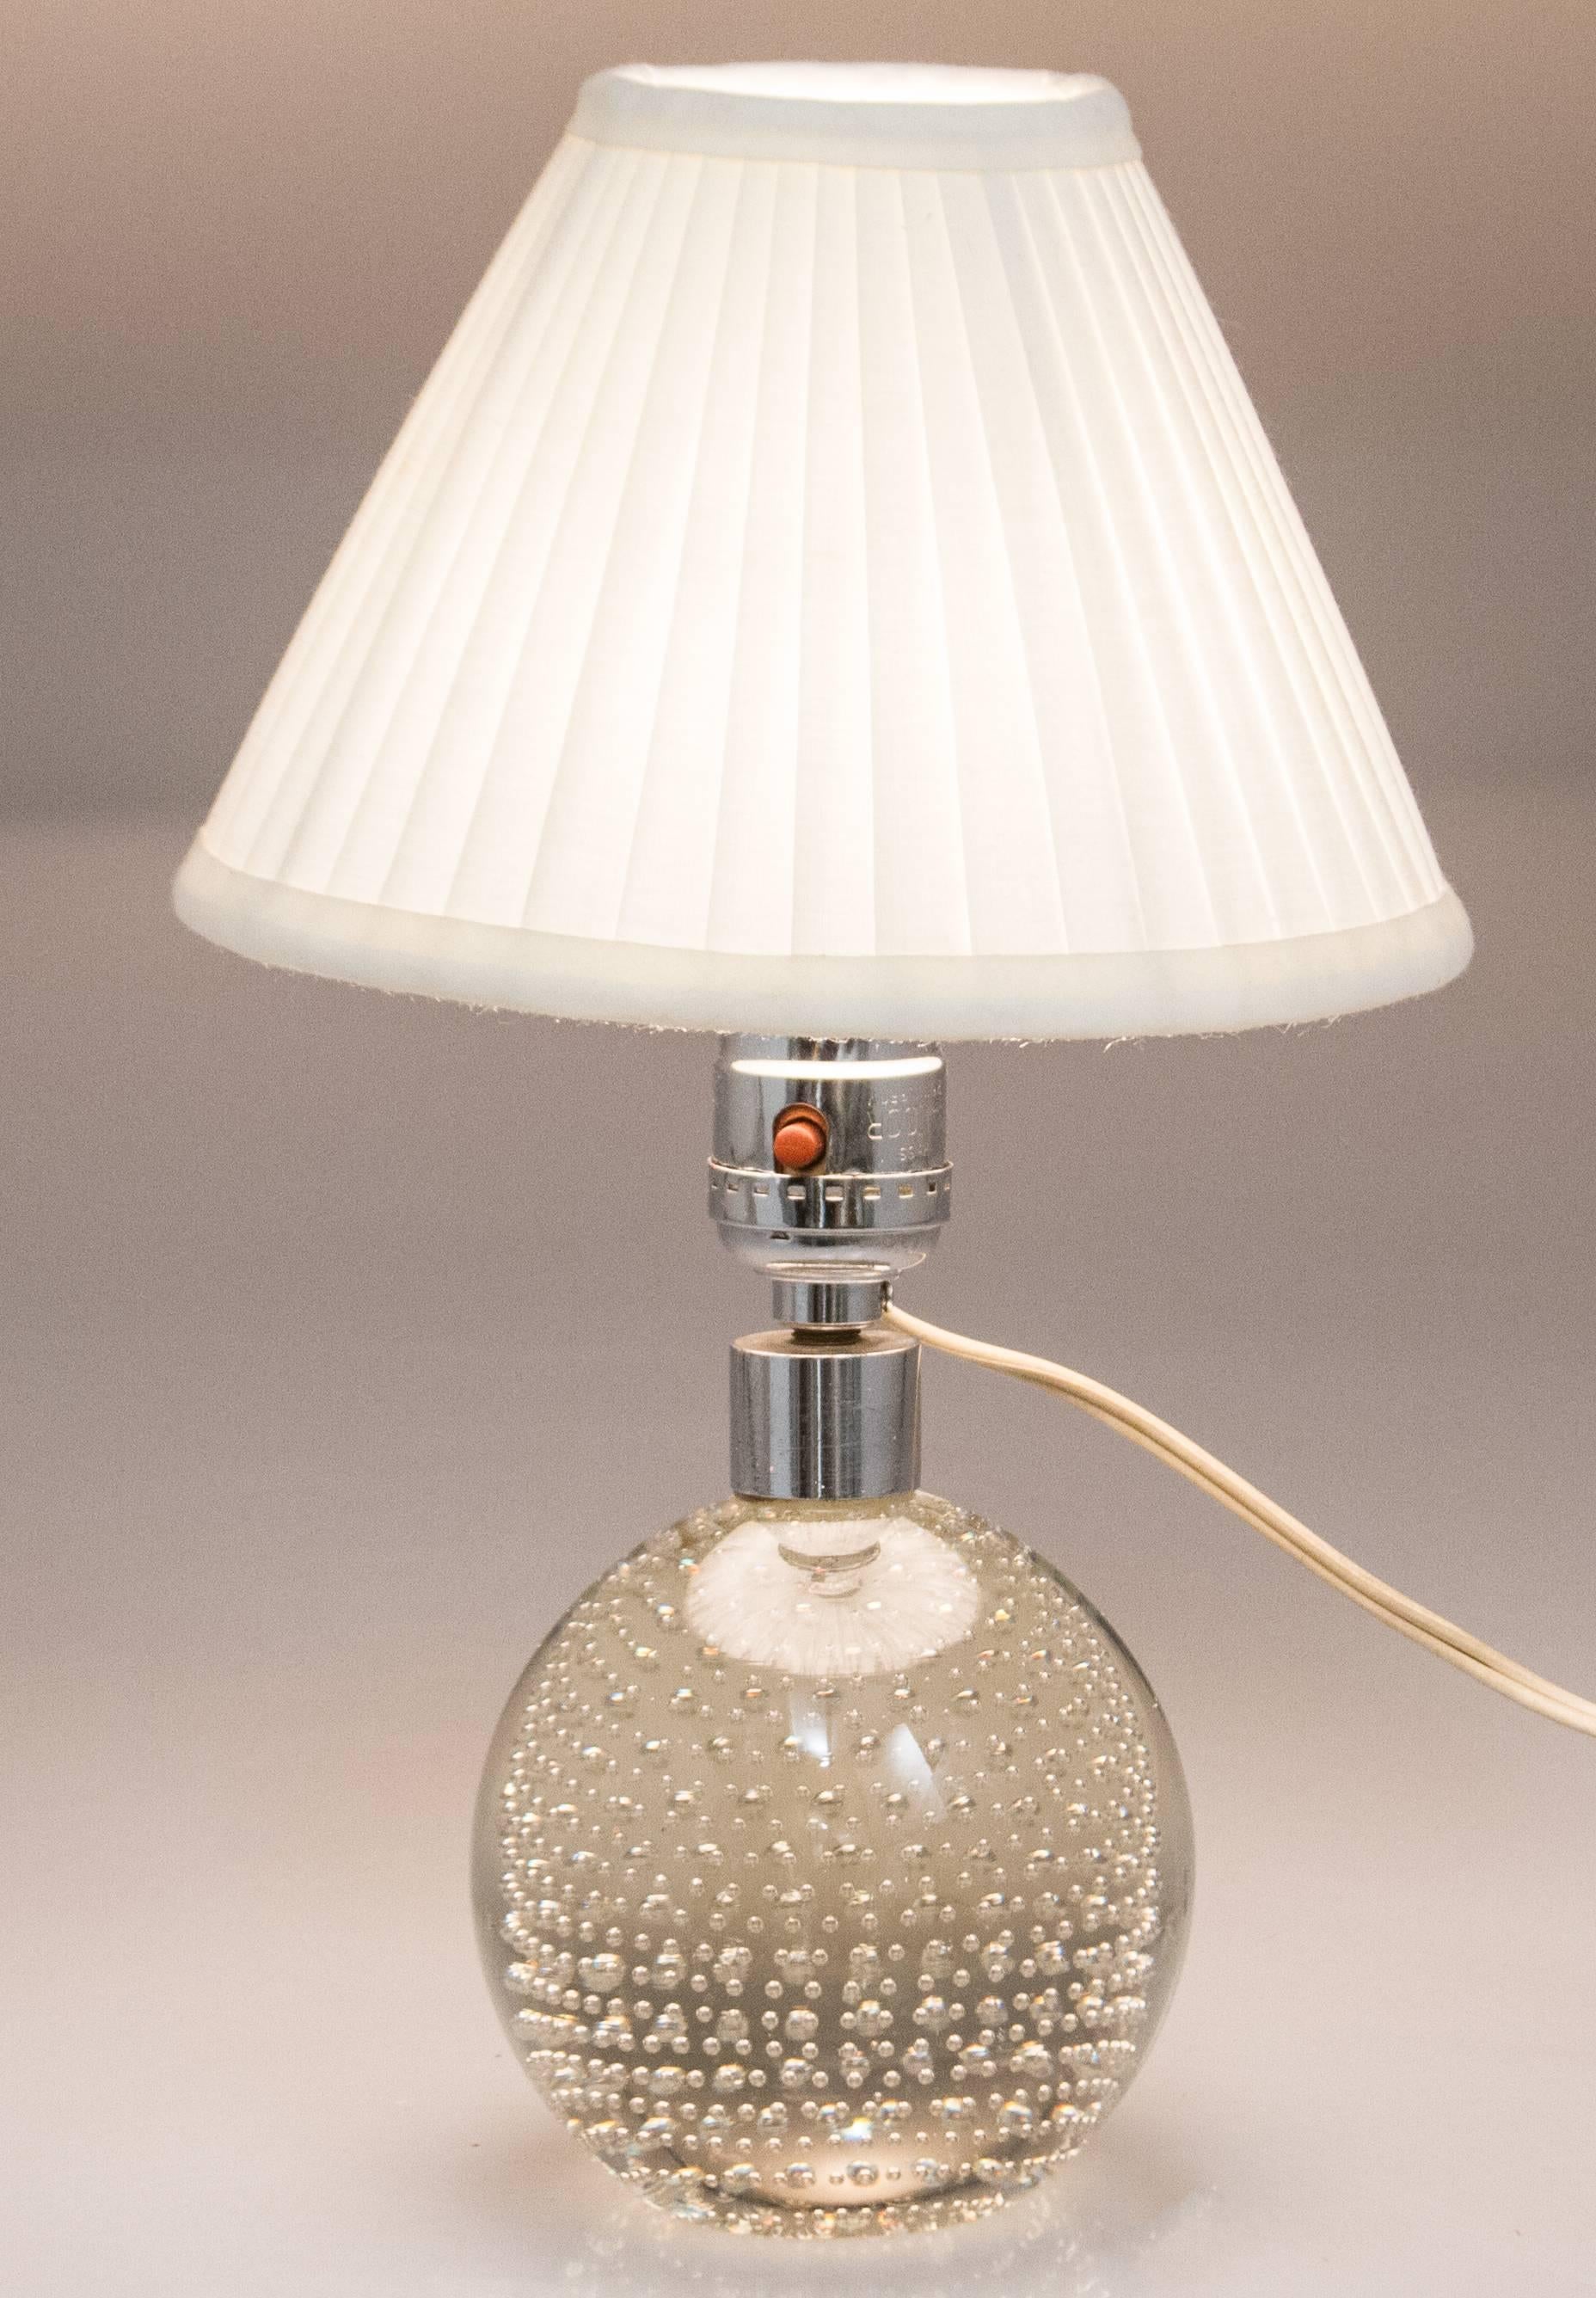 These are beautiful small lamps that look exceptional when lit.